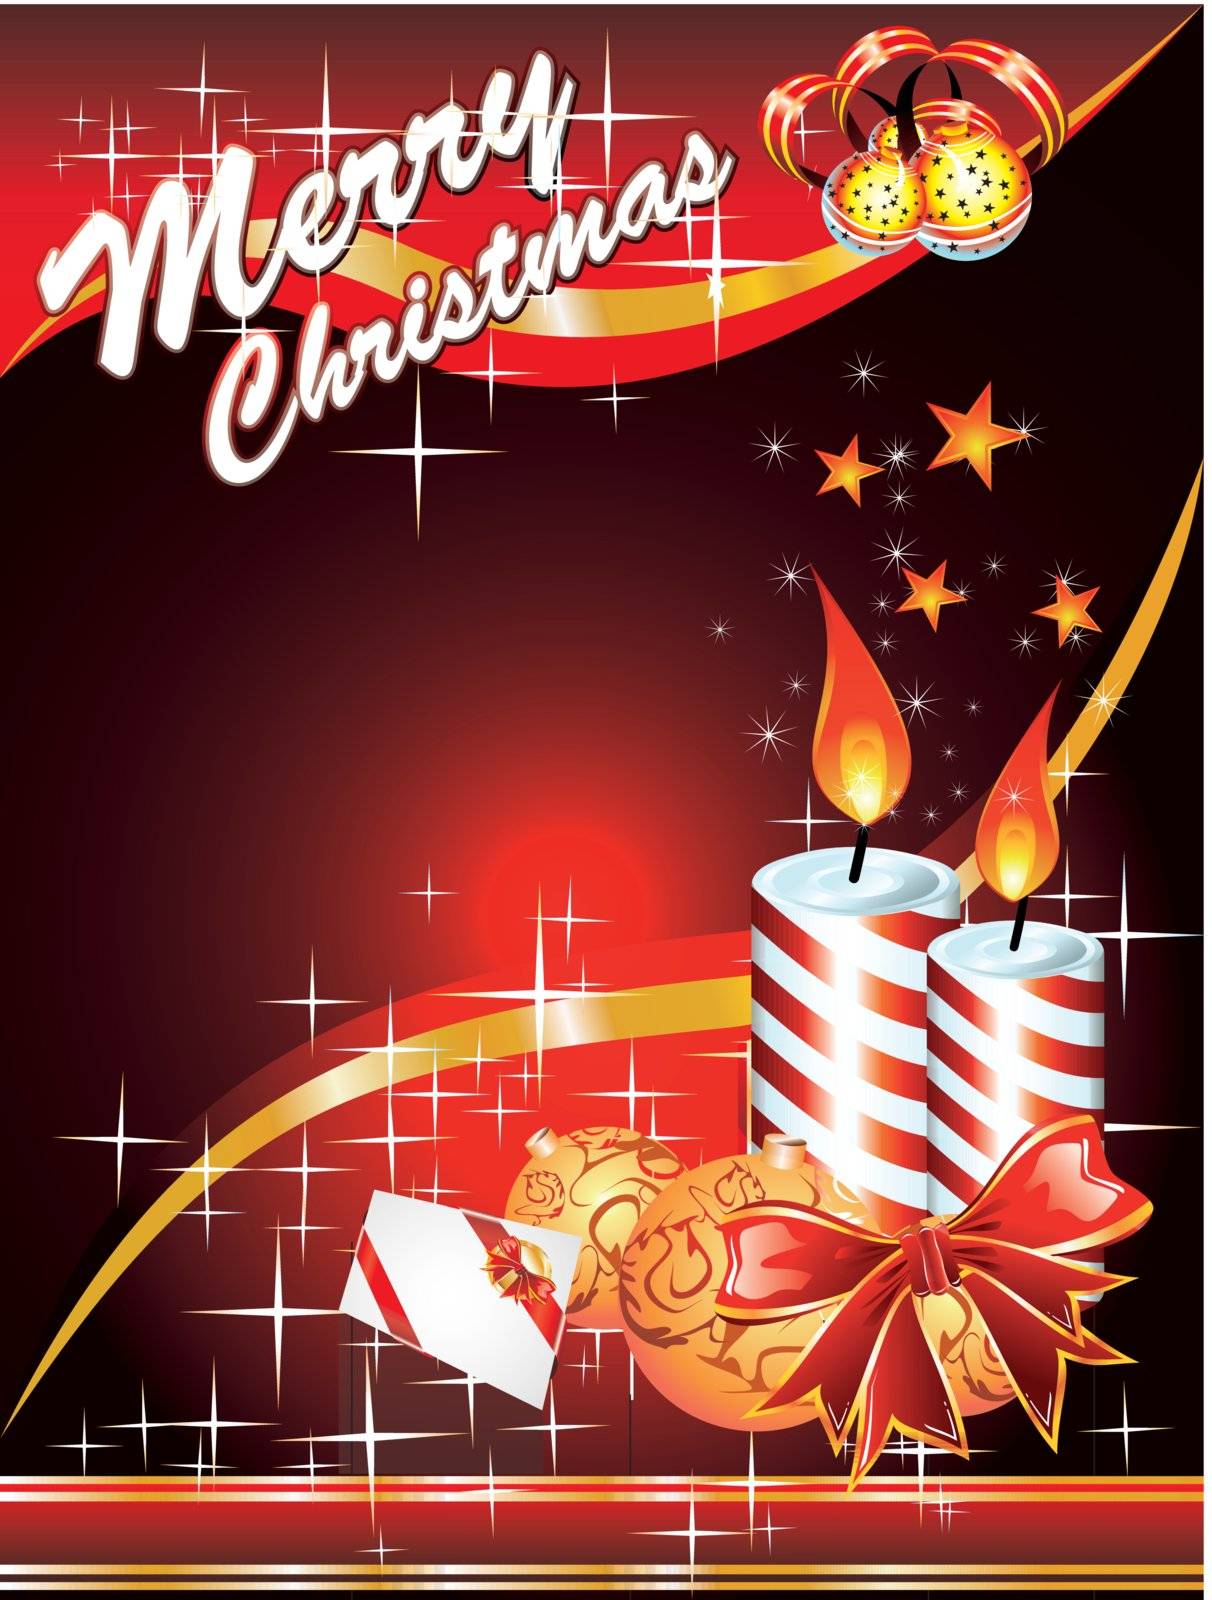 Merry Christmas Card with space for text 